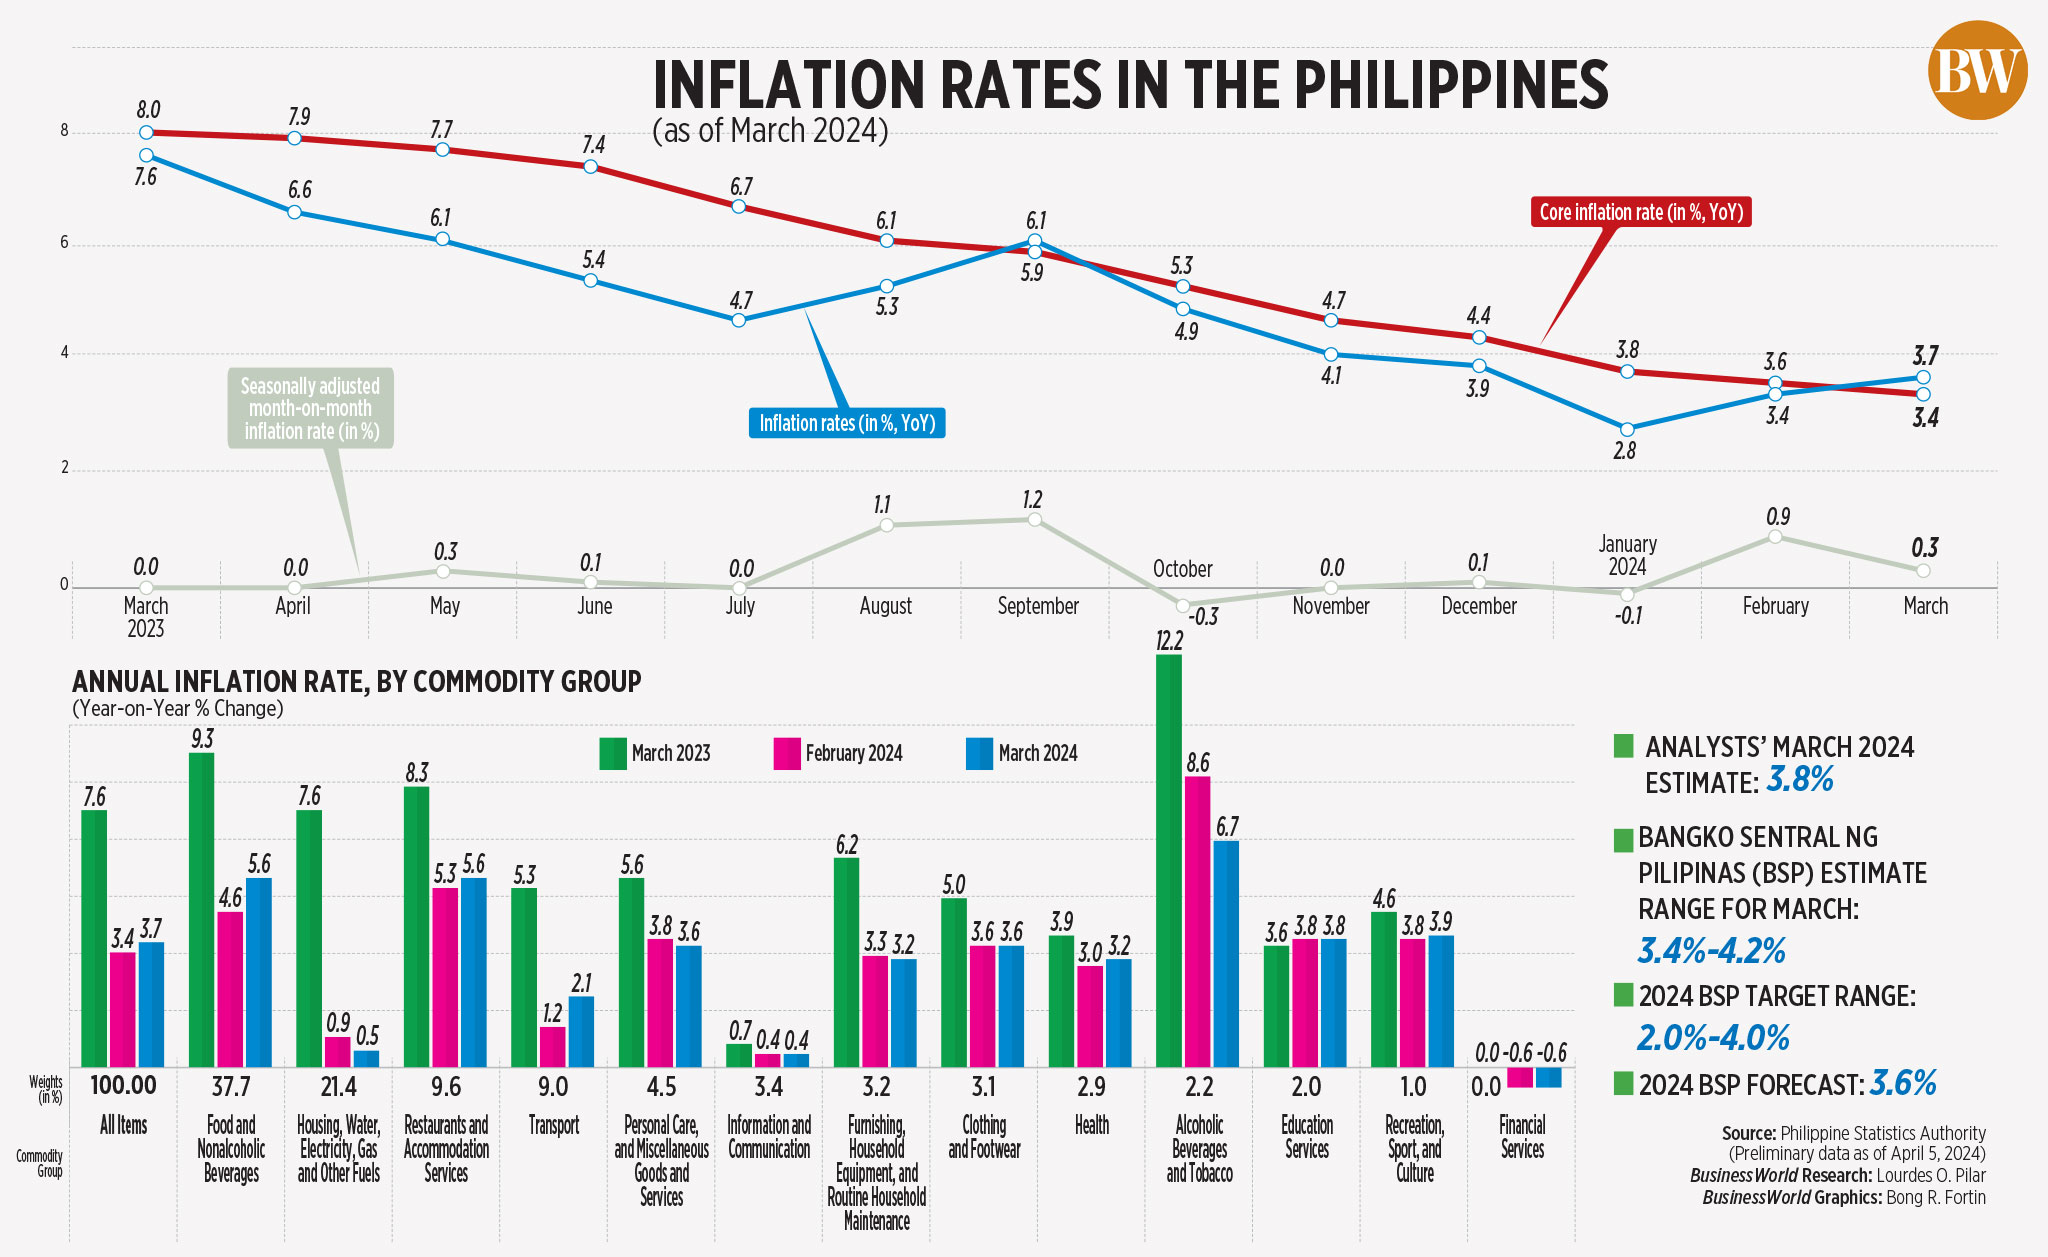 Inflation rates in the Philippines